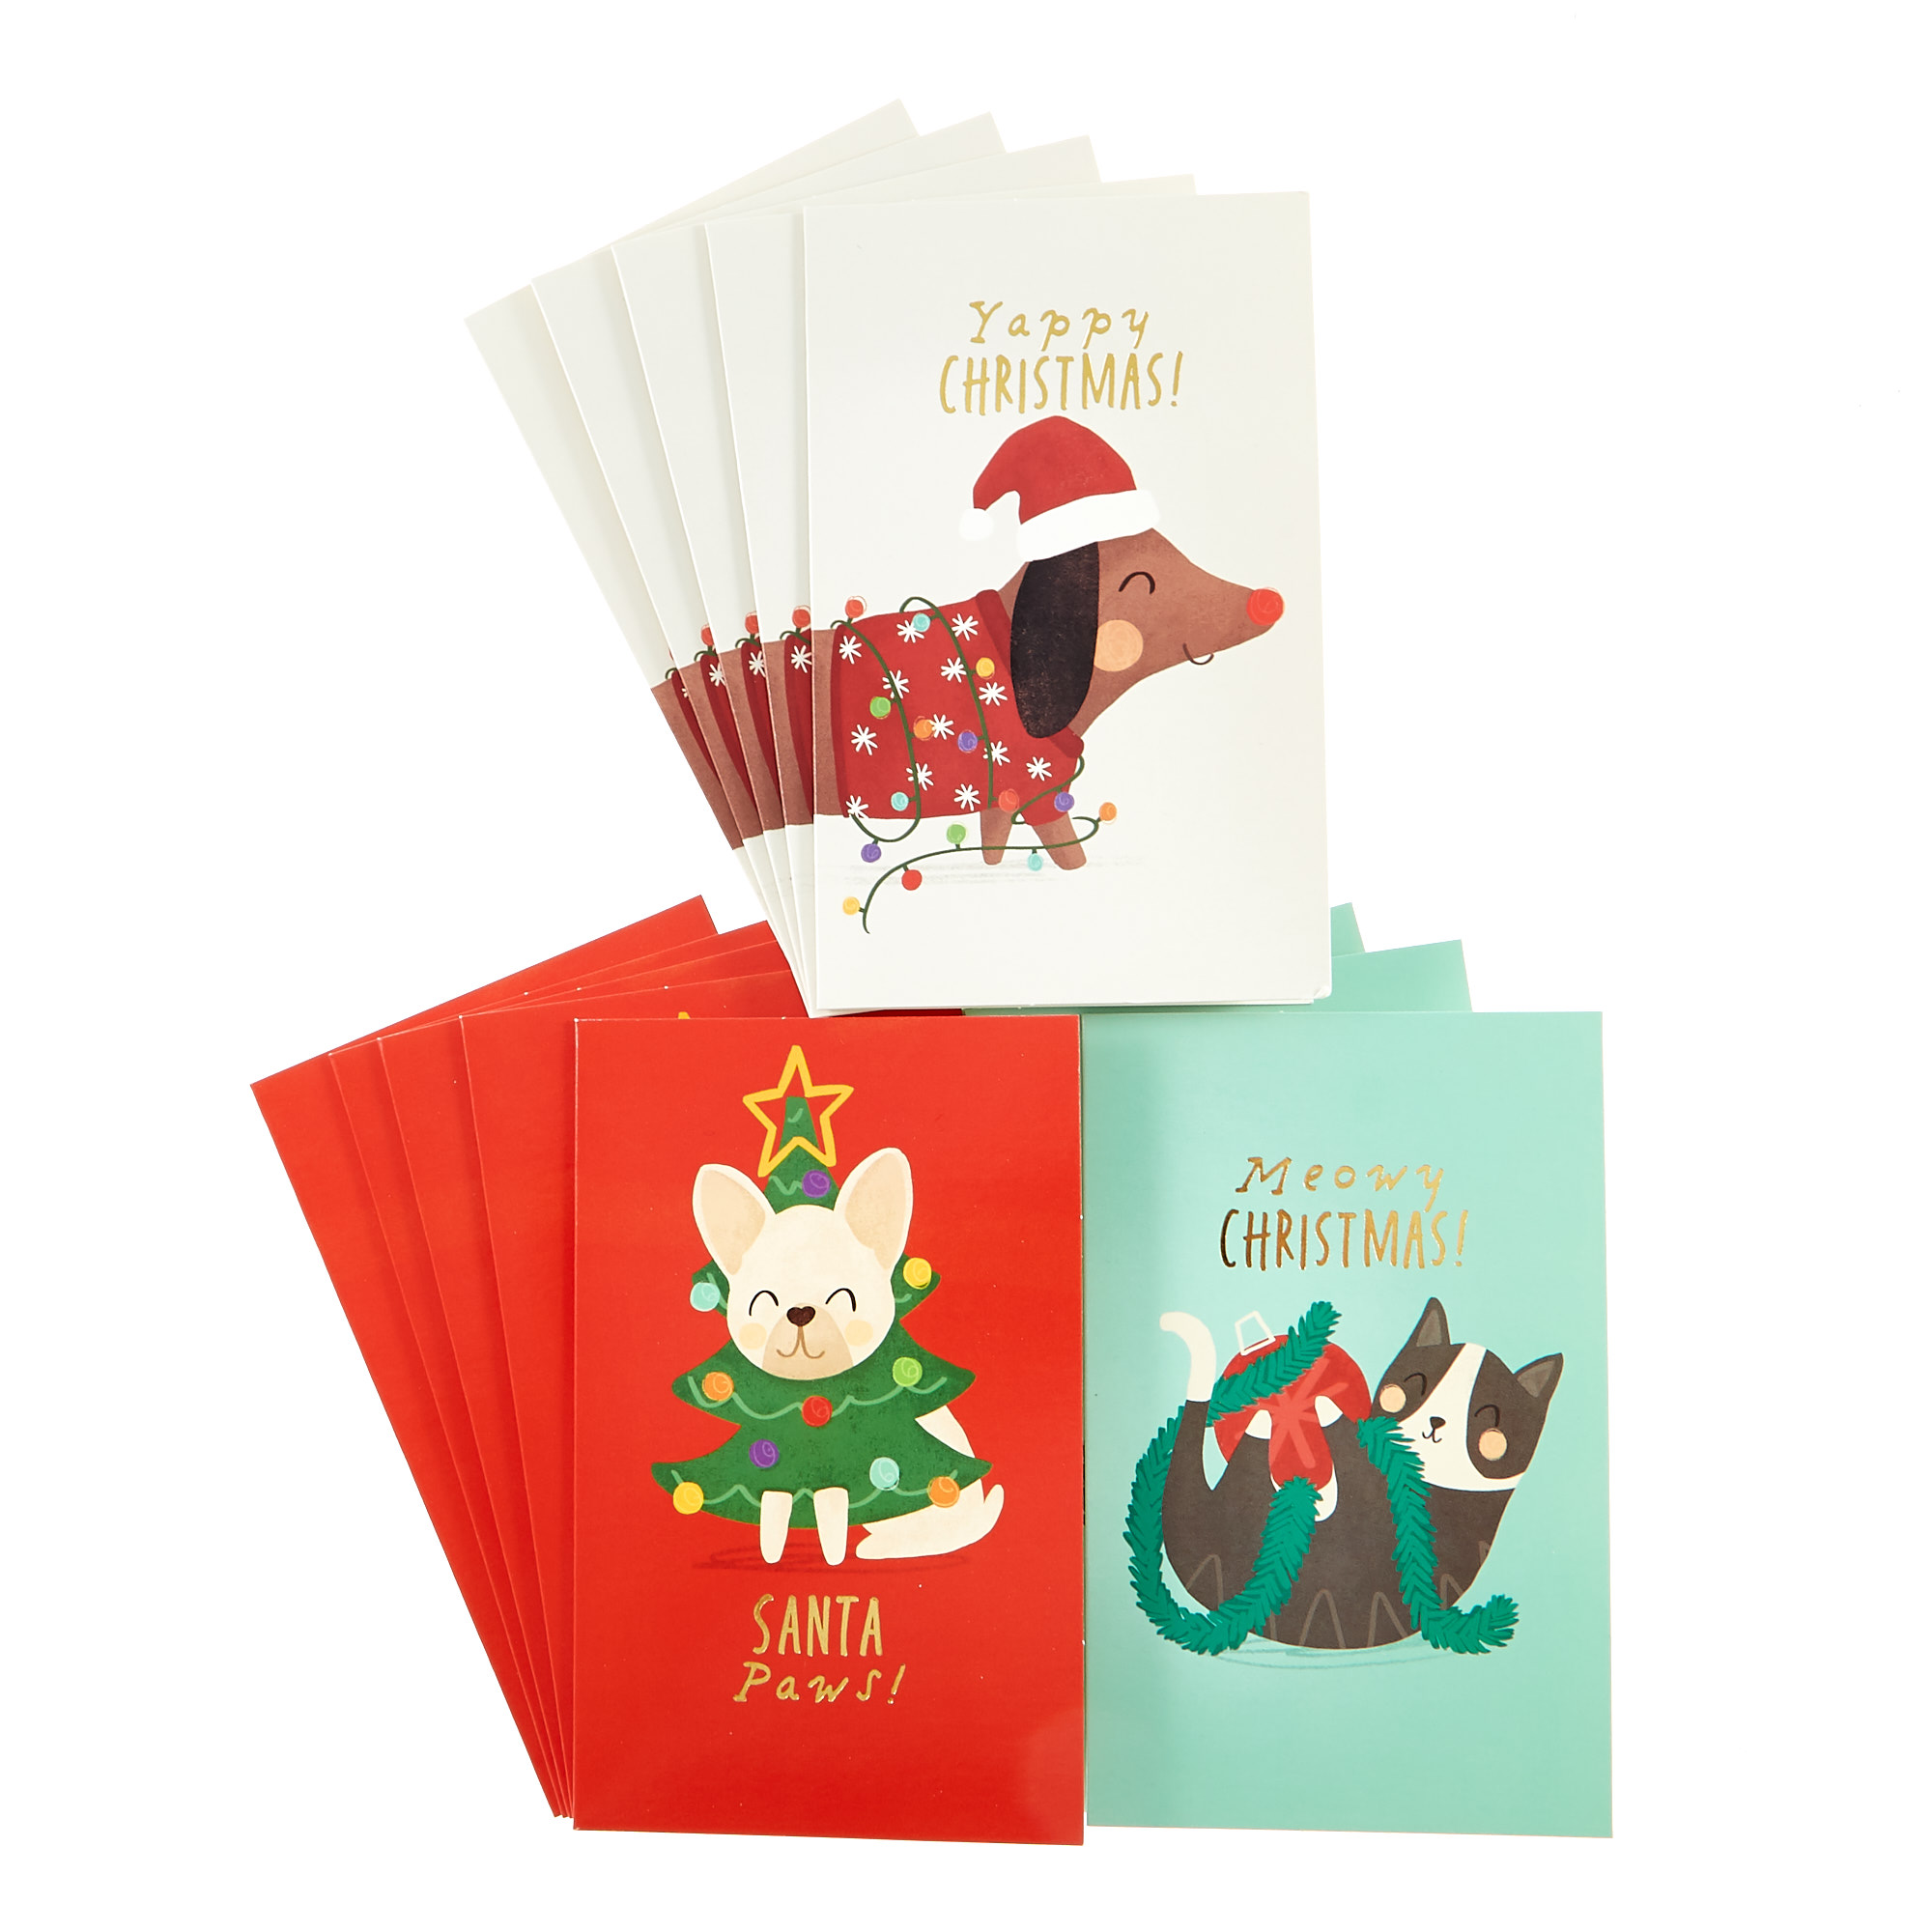 18 Charity Christmas Cards - Cats & Dogs (3 Designs)